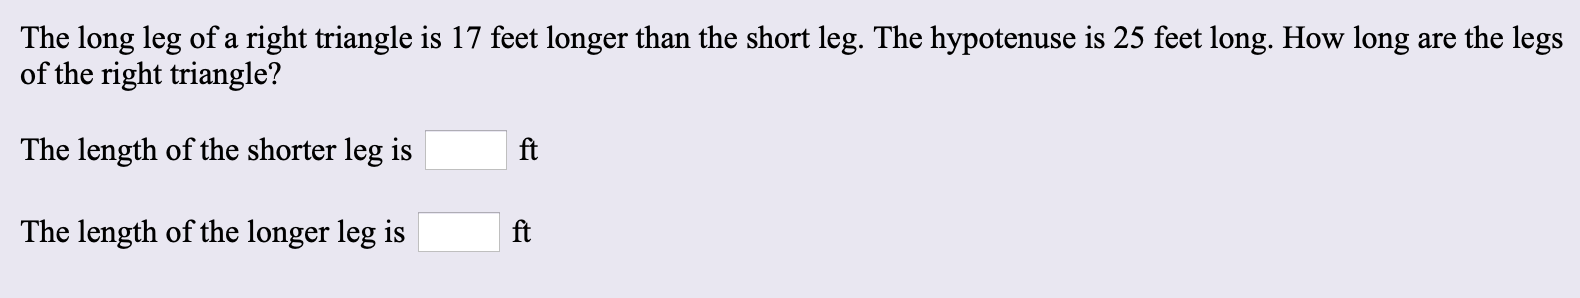 The long leg of a right triangle is 17 feet longer than the short leg. The hypotenuse is 25 feet long. How long are the legs
of the right triangle?
The length of the shorter leg is
ft
The length of the longer leg is
ft
